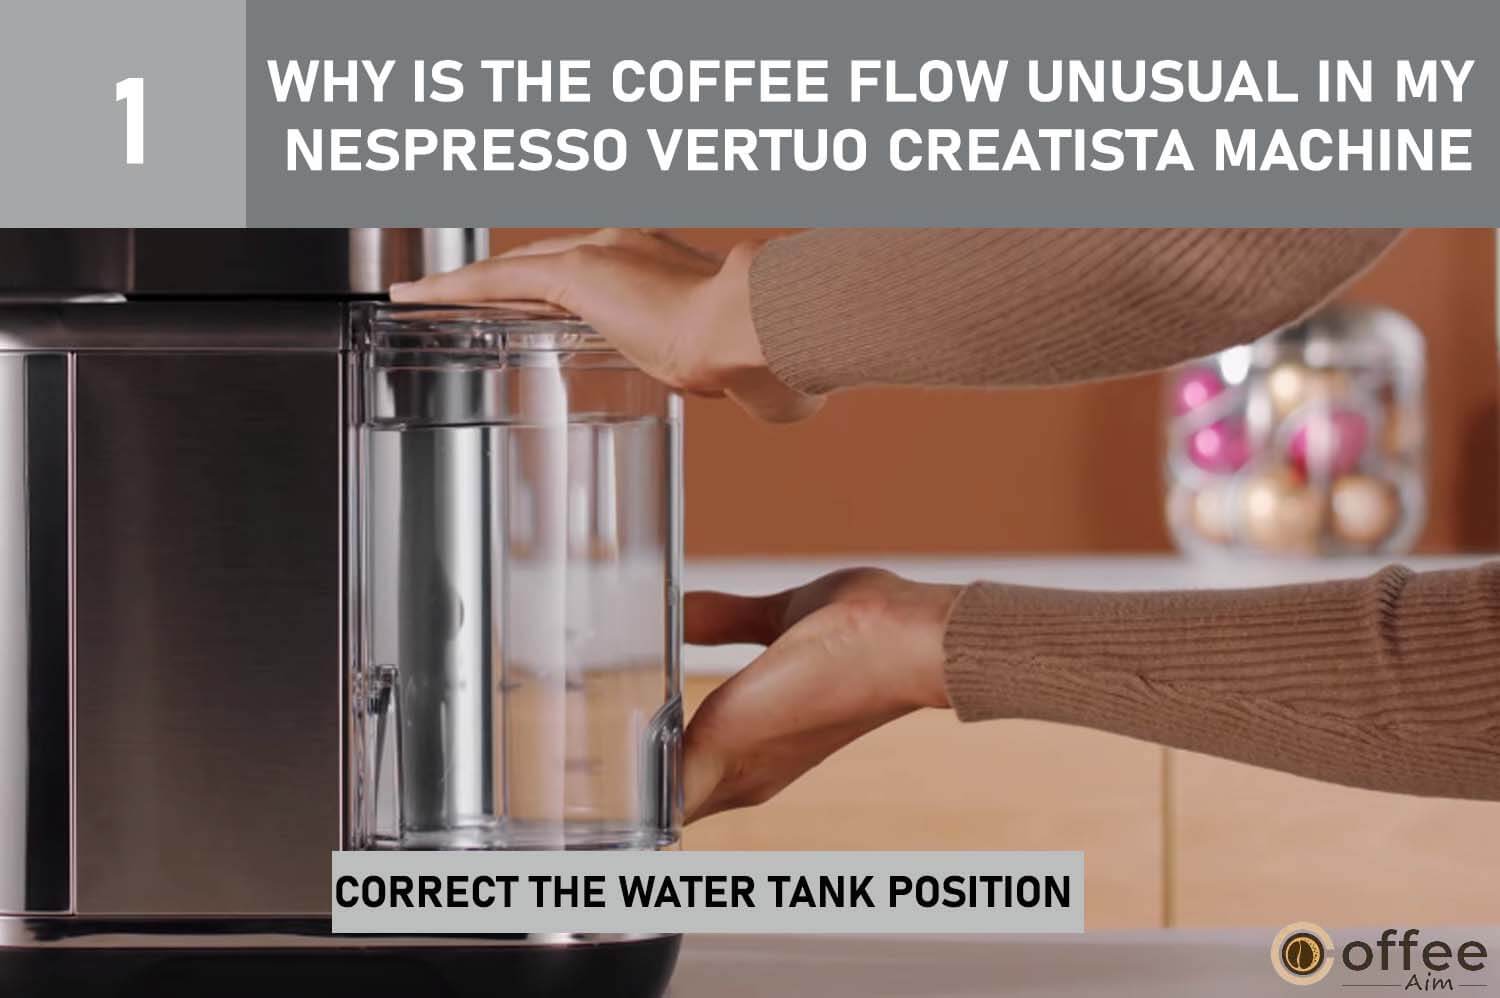 Adjust the water tank in your Nespresso Vertuo Creatista machine properly to ensure normal coffee flow. Follow instructions in article.